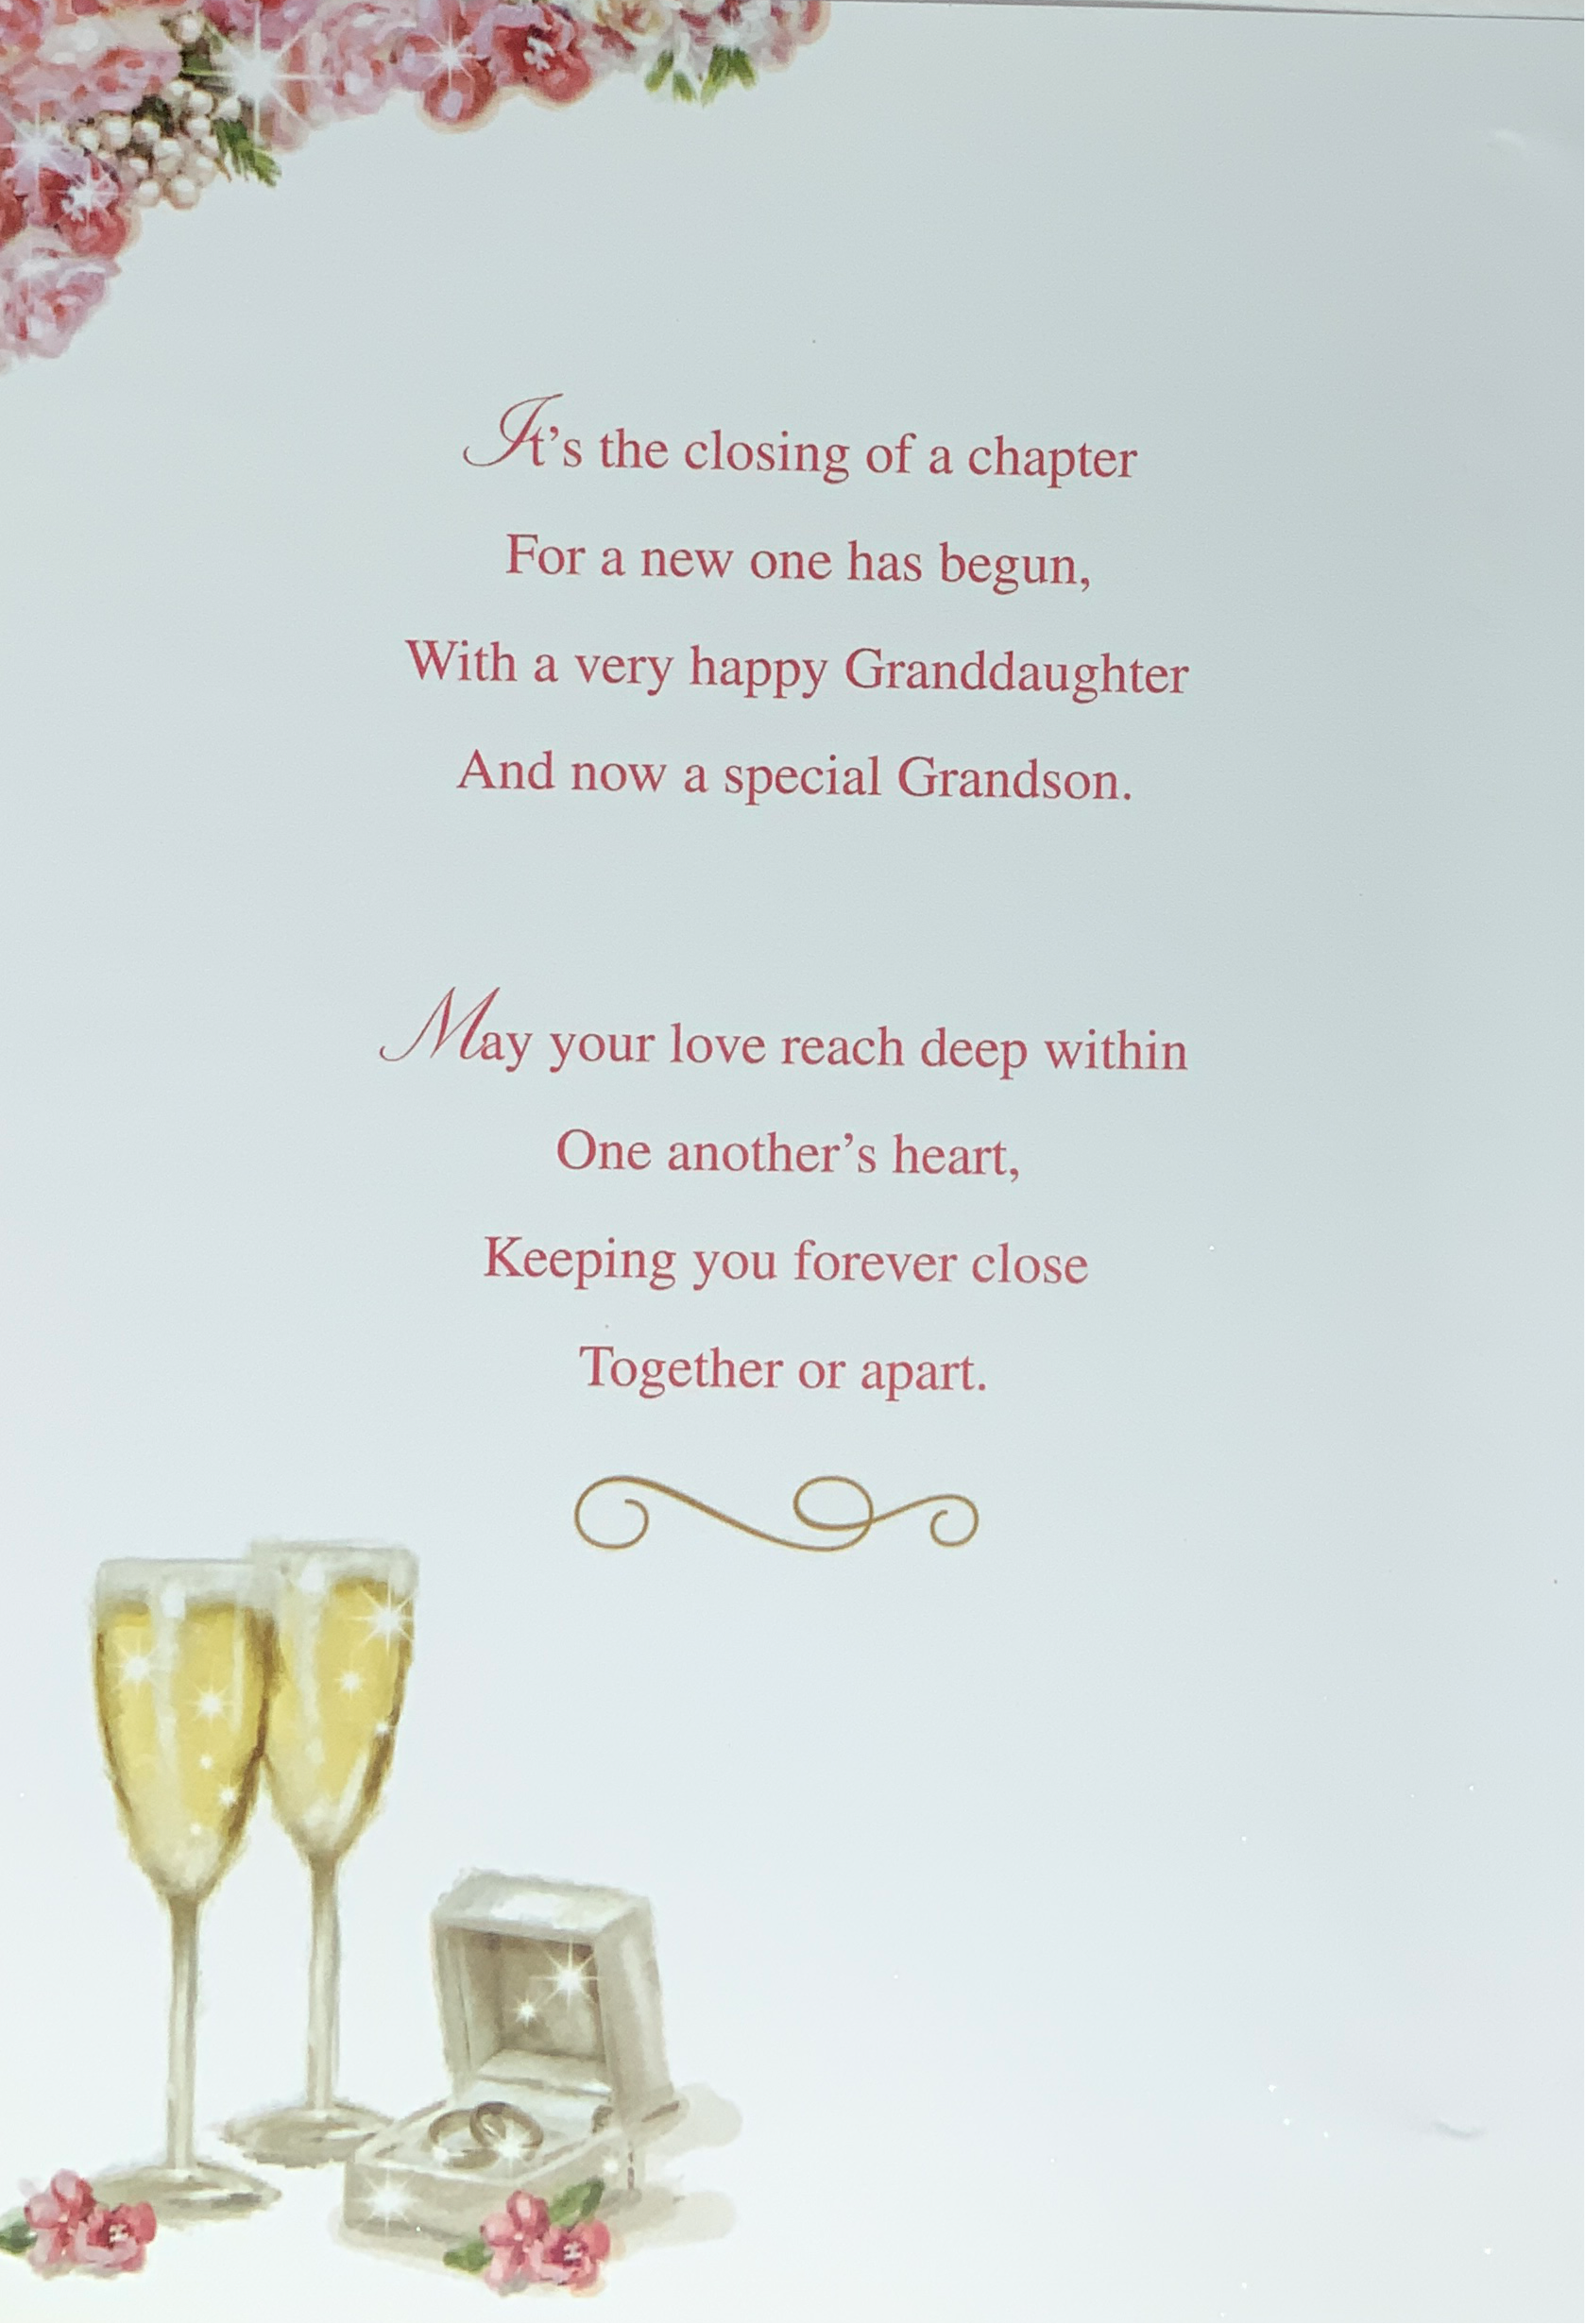 Wedding Card - Granddaughter & Your Husband / A White Cake With Pink Flowers & Gold Hearts